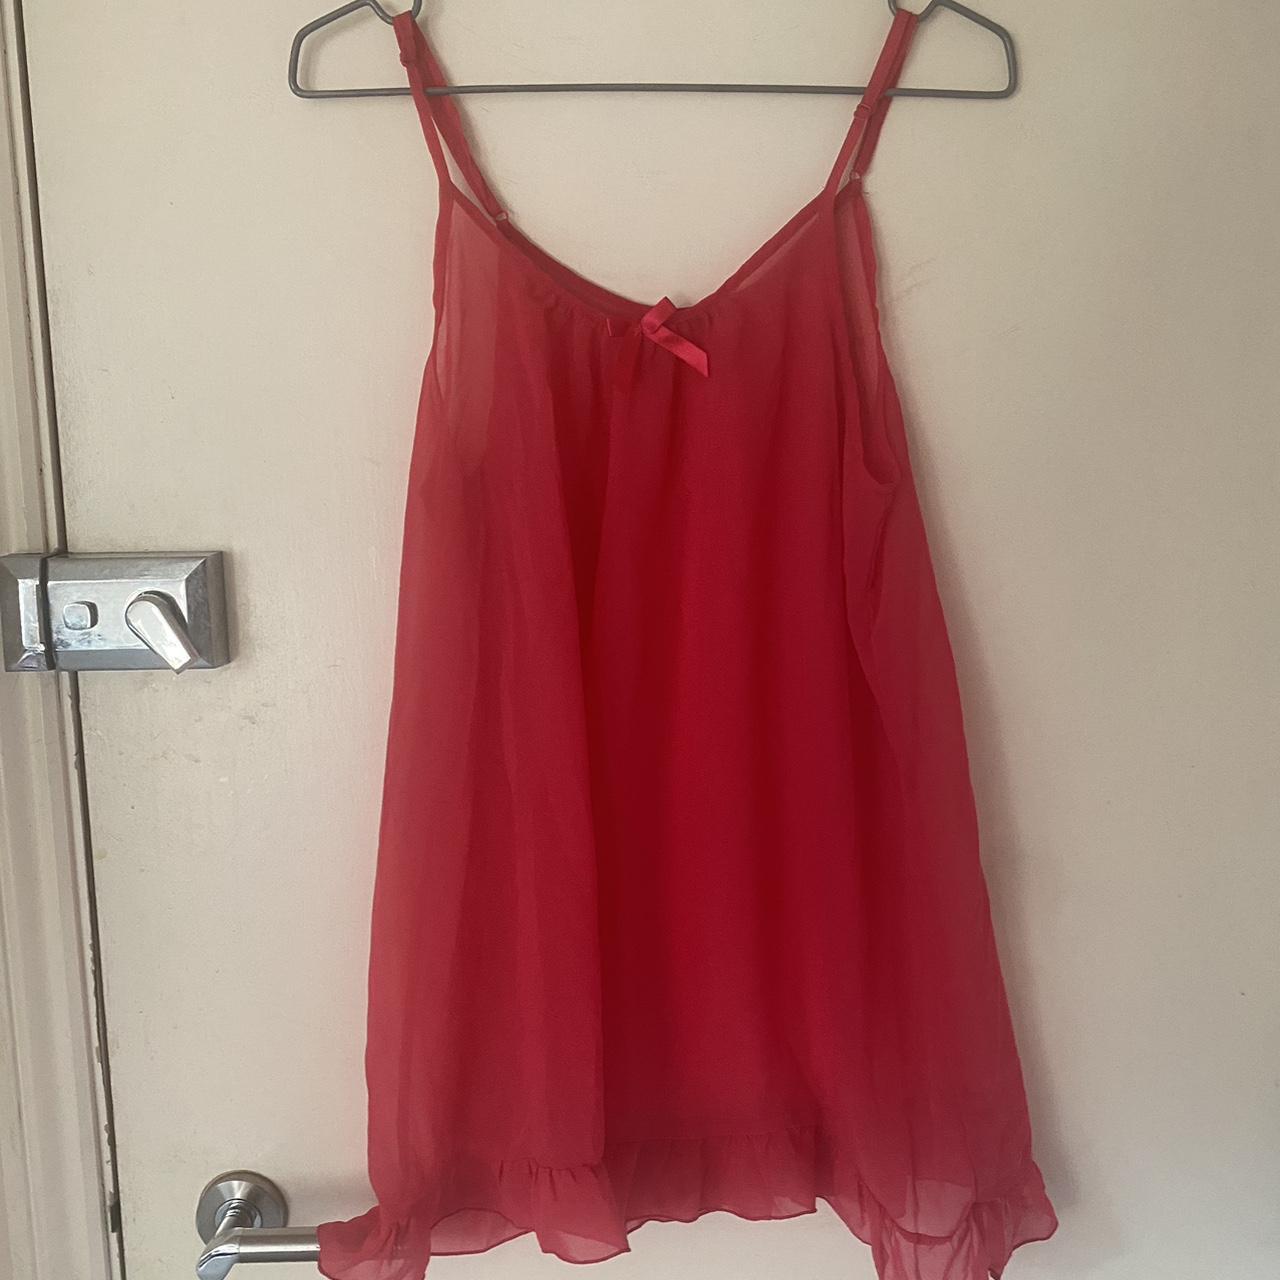 Babydoll red lace sheer mini slip dress with frilled... - Depop